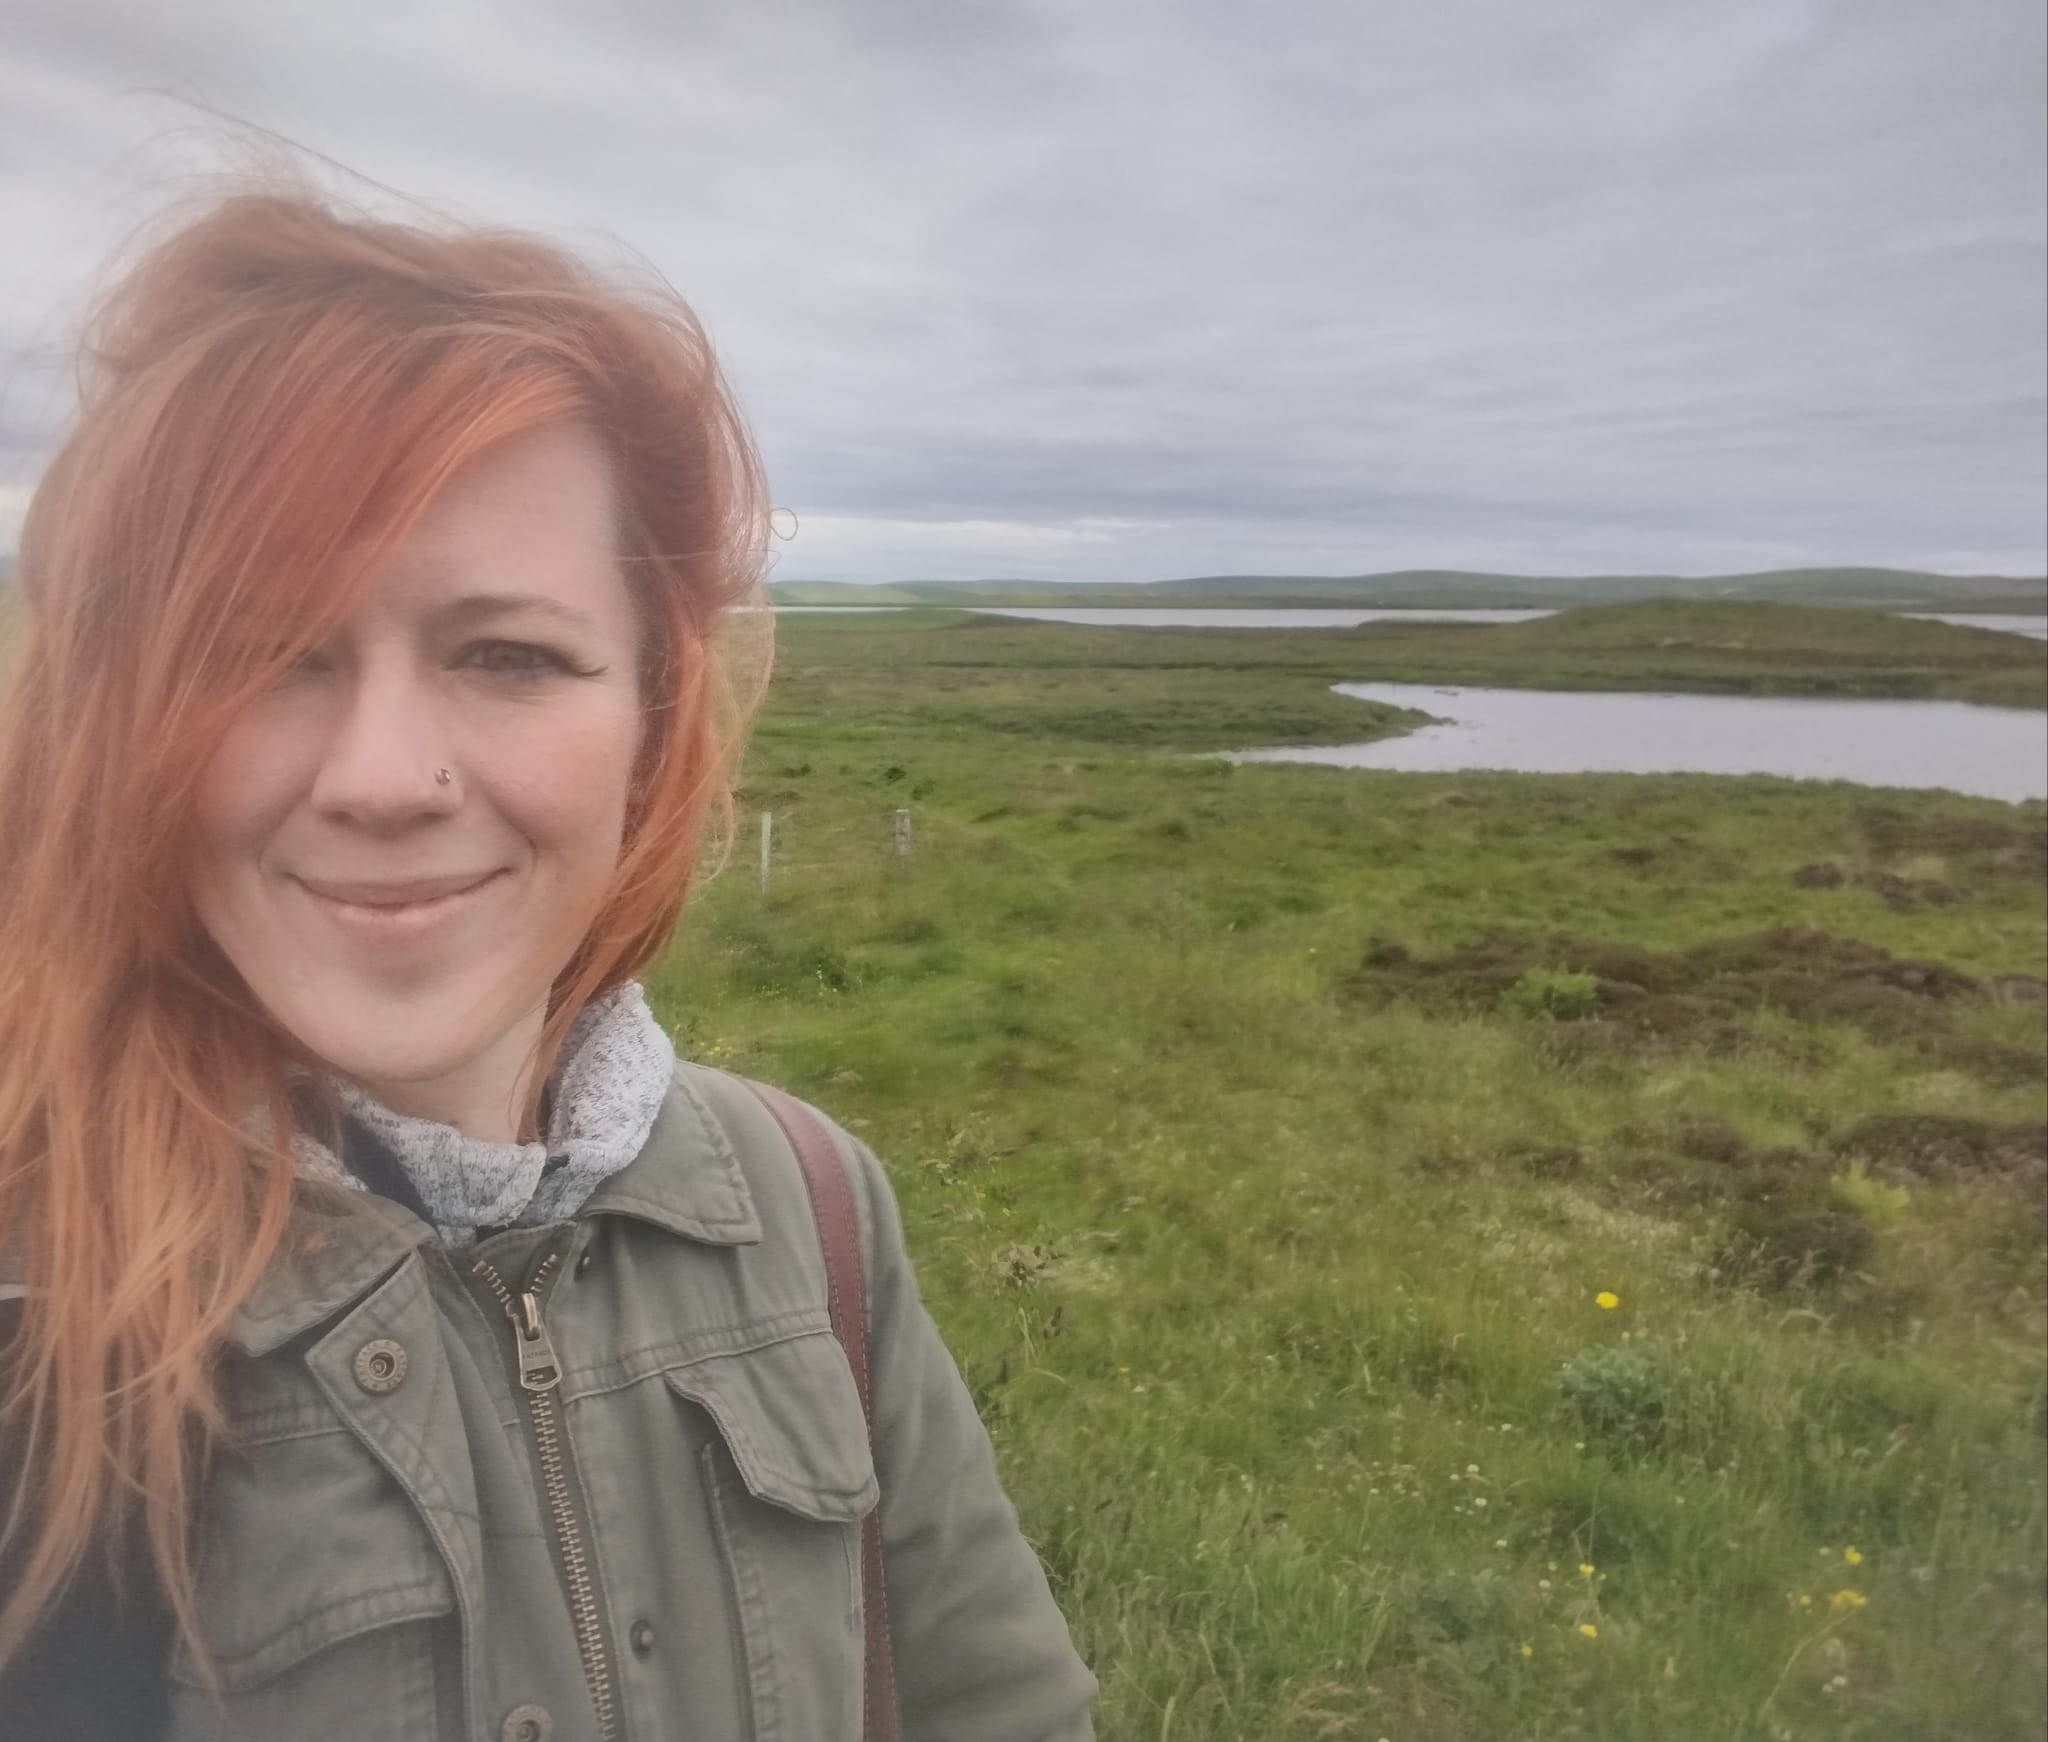 Woman with red hair standing close to the camera with a green moorland landscape behind her, with bodies of water in the background and a grey sky above.